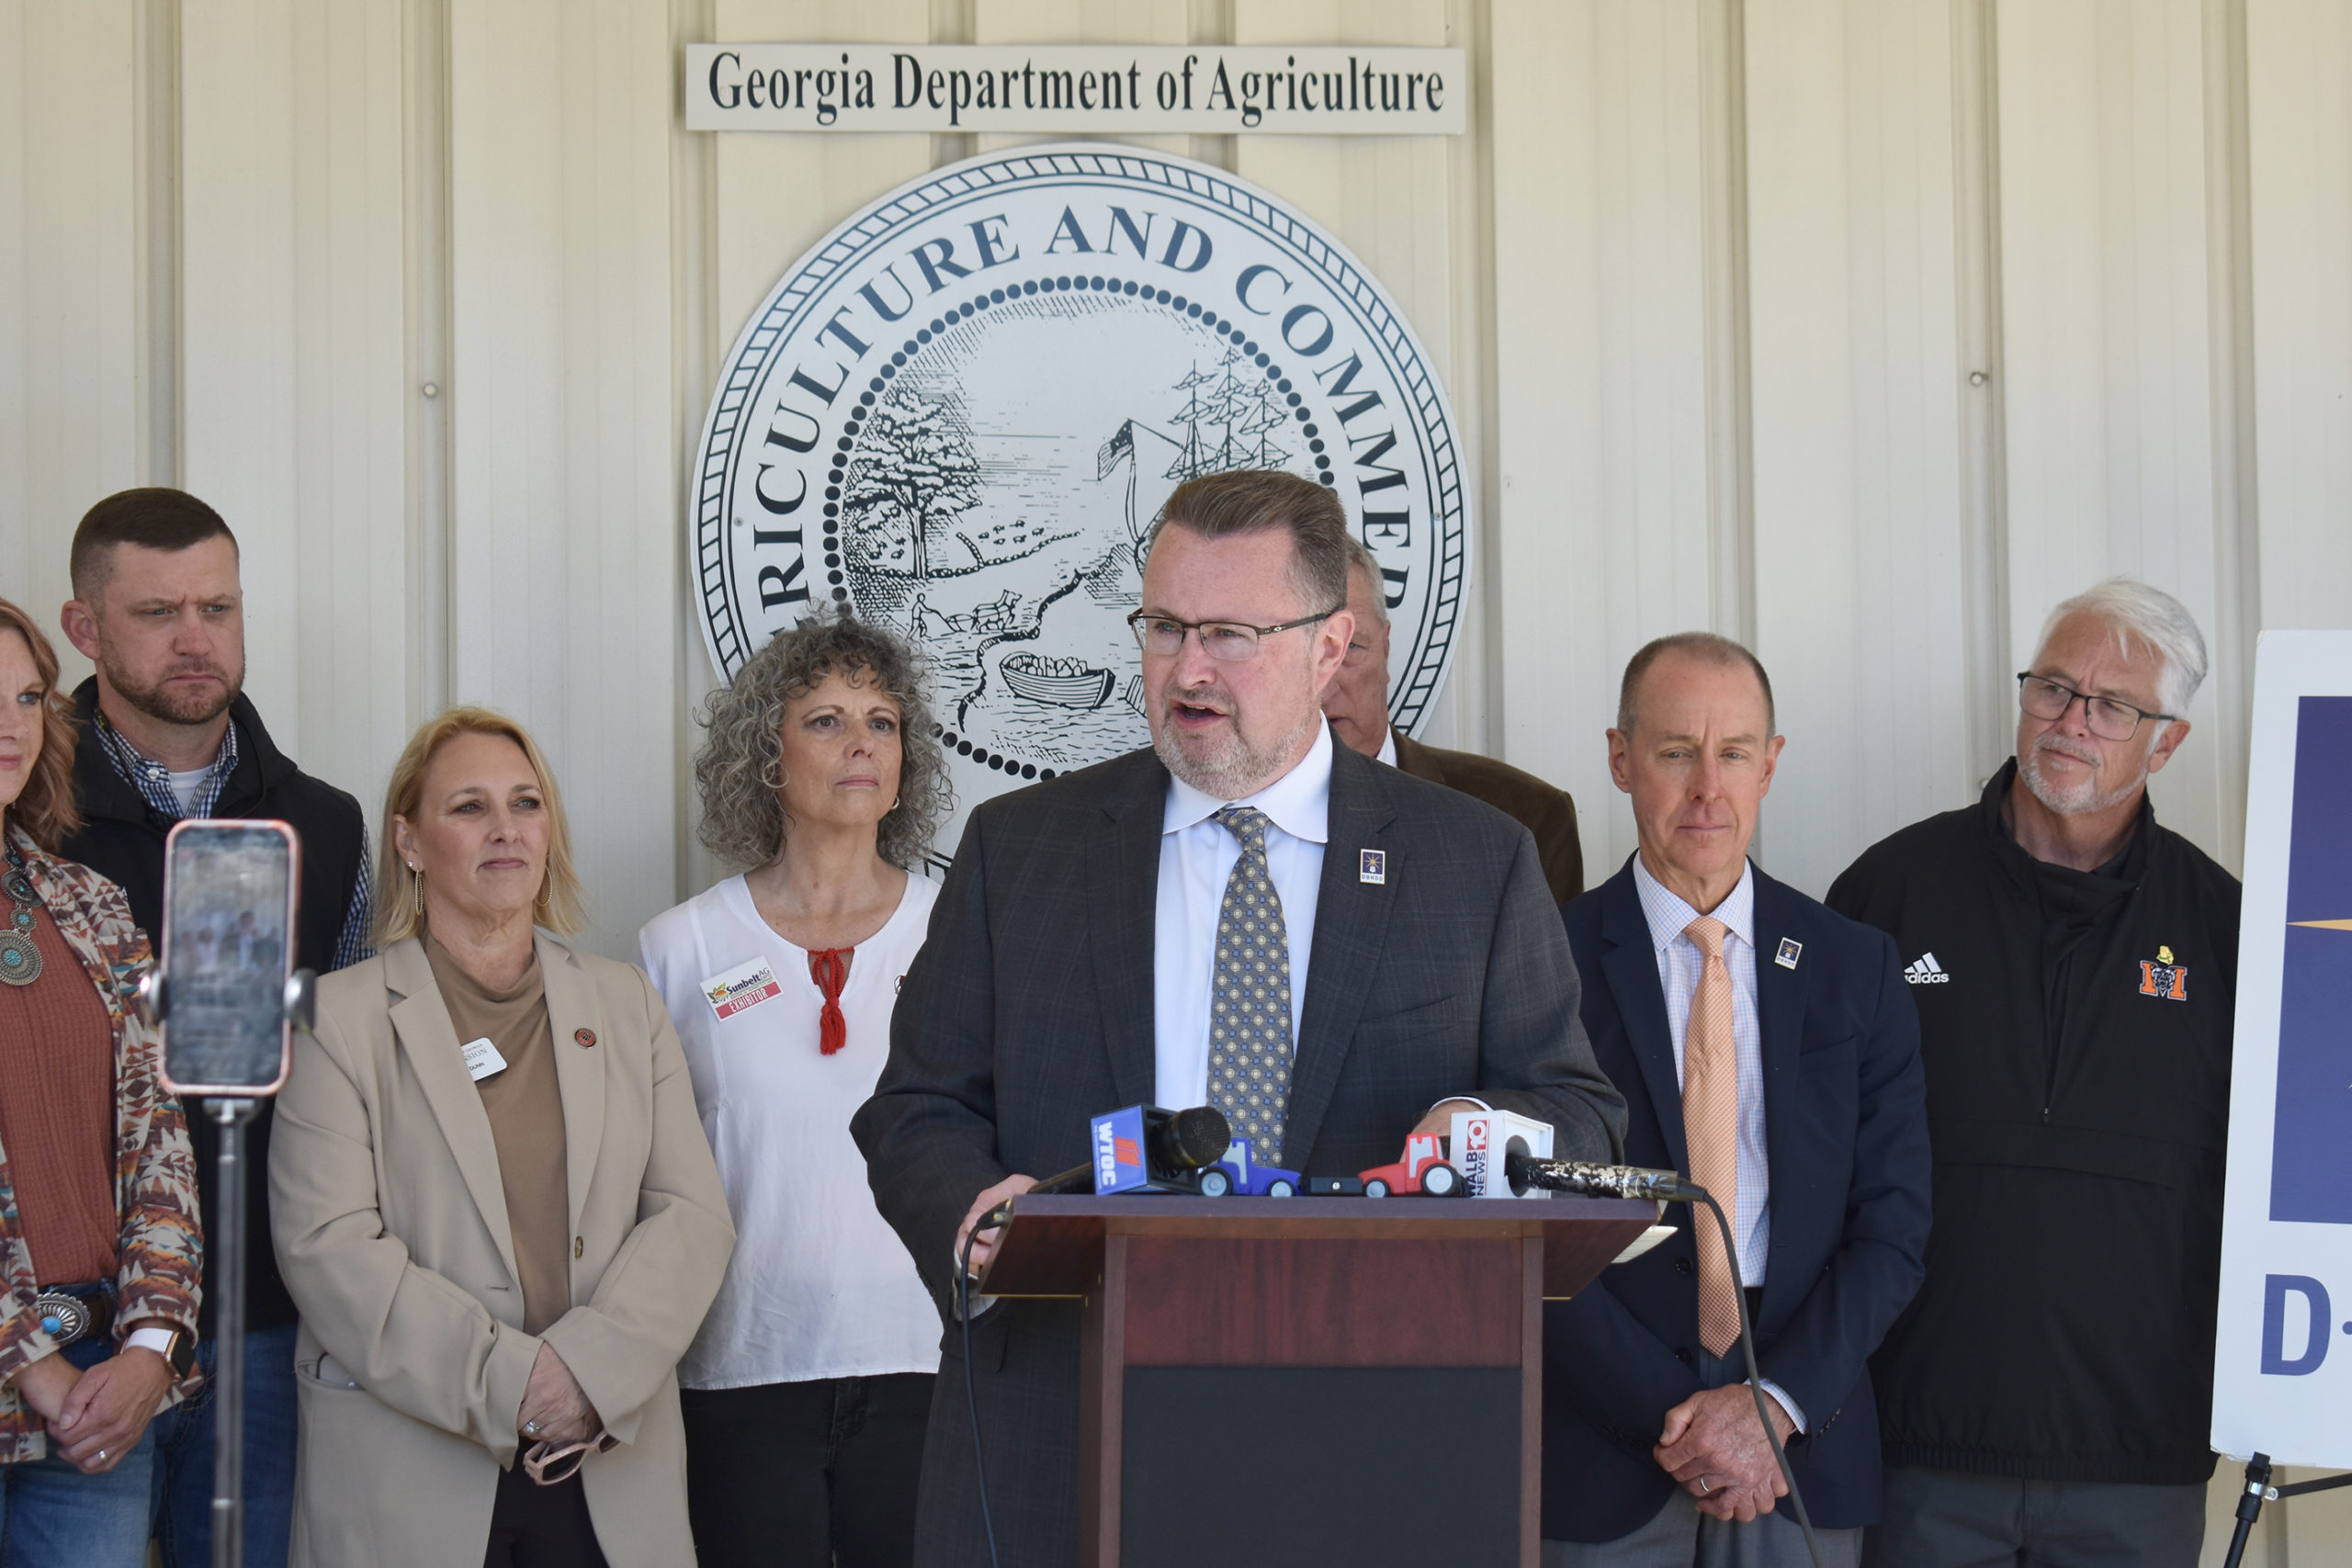 Featured image for “Farmer’s Mental Health Highlighted During Press Conference at Sunbelt Ag Expo”